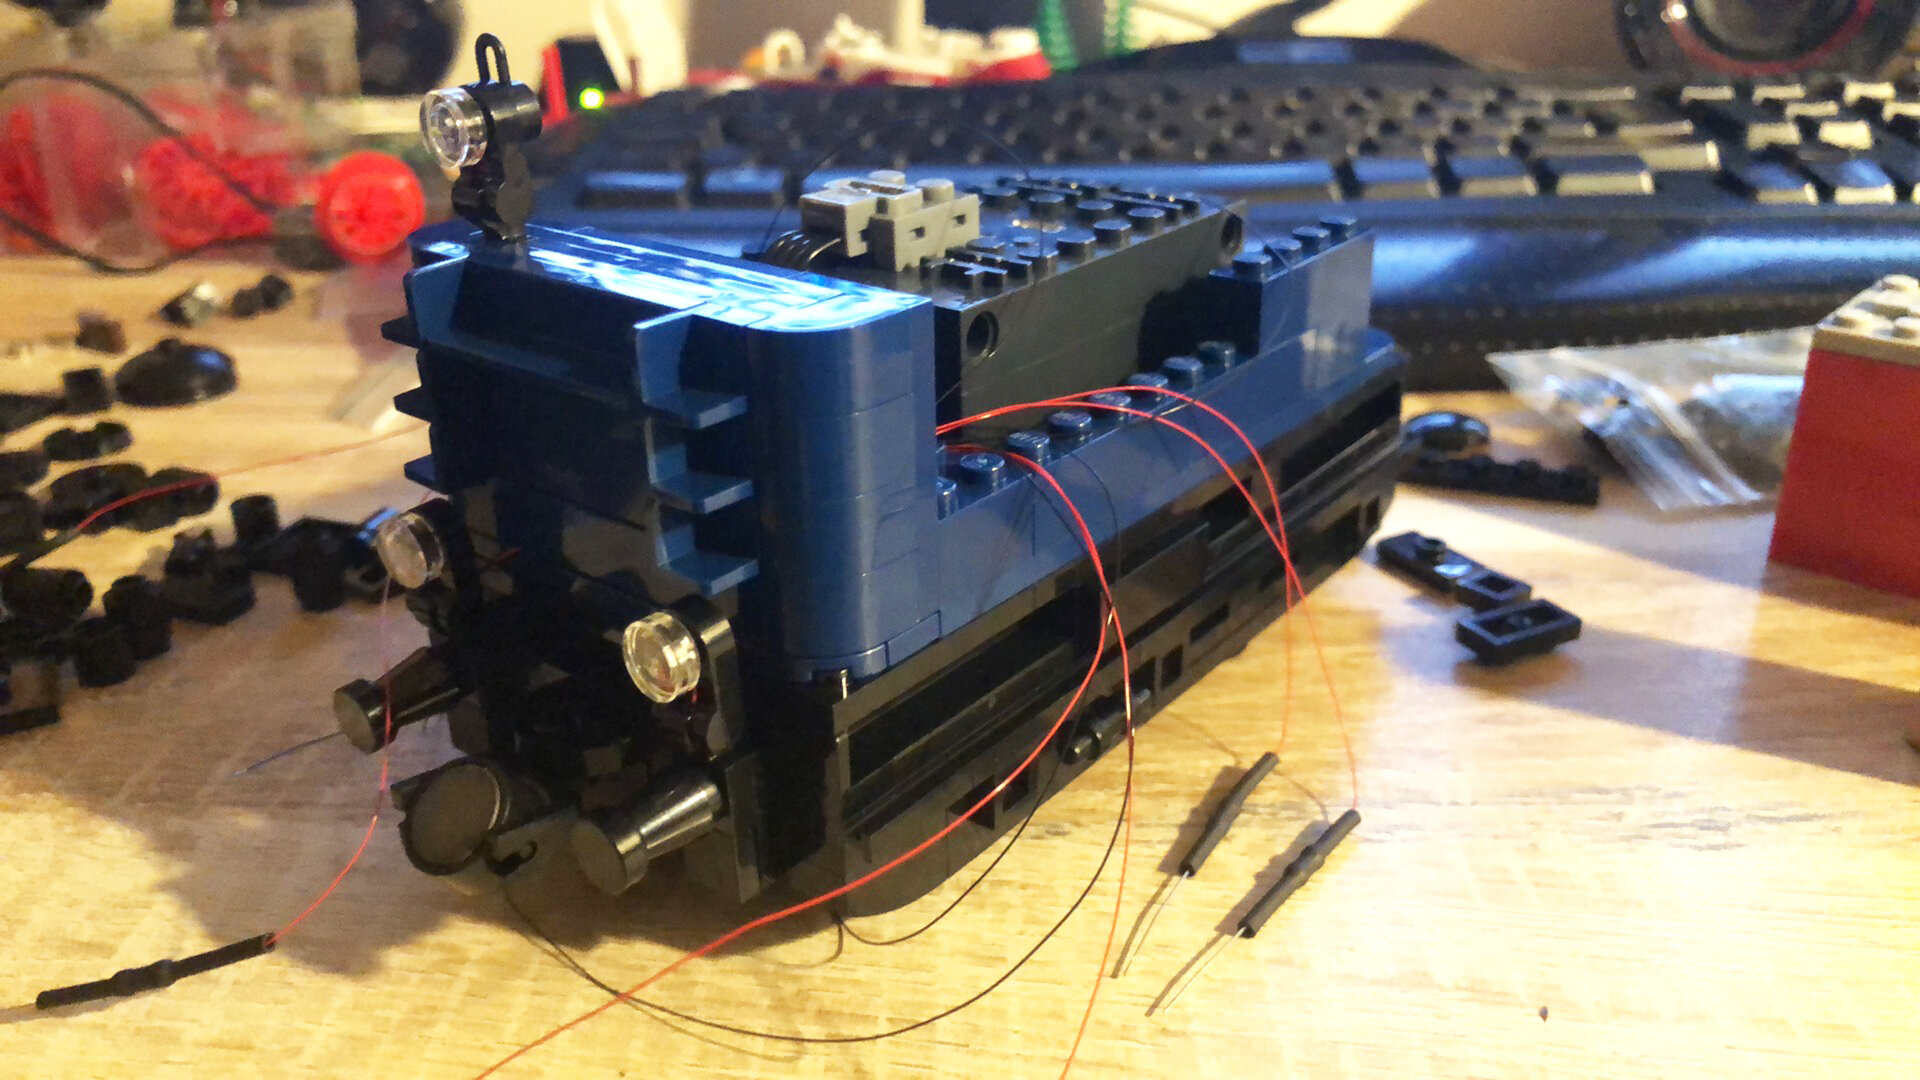  Working on the tender, you can see the led wires. The sides of the tender ended up more SNOT build in the final version. 